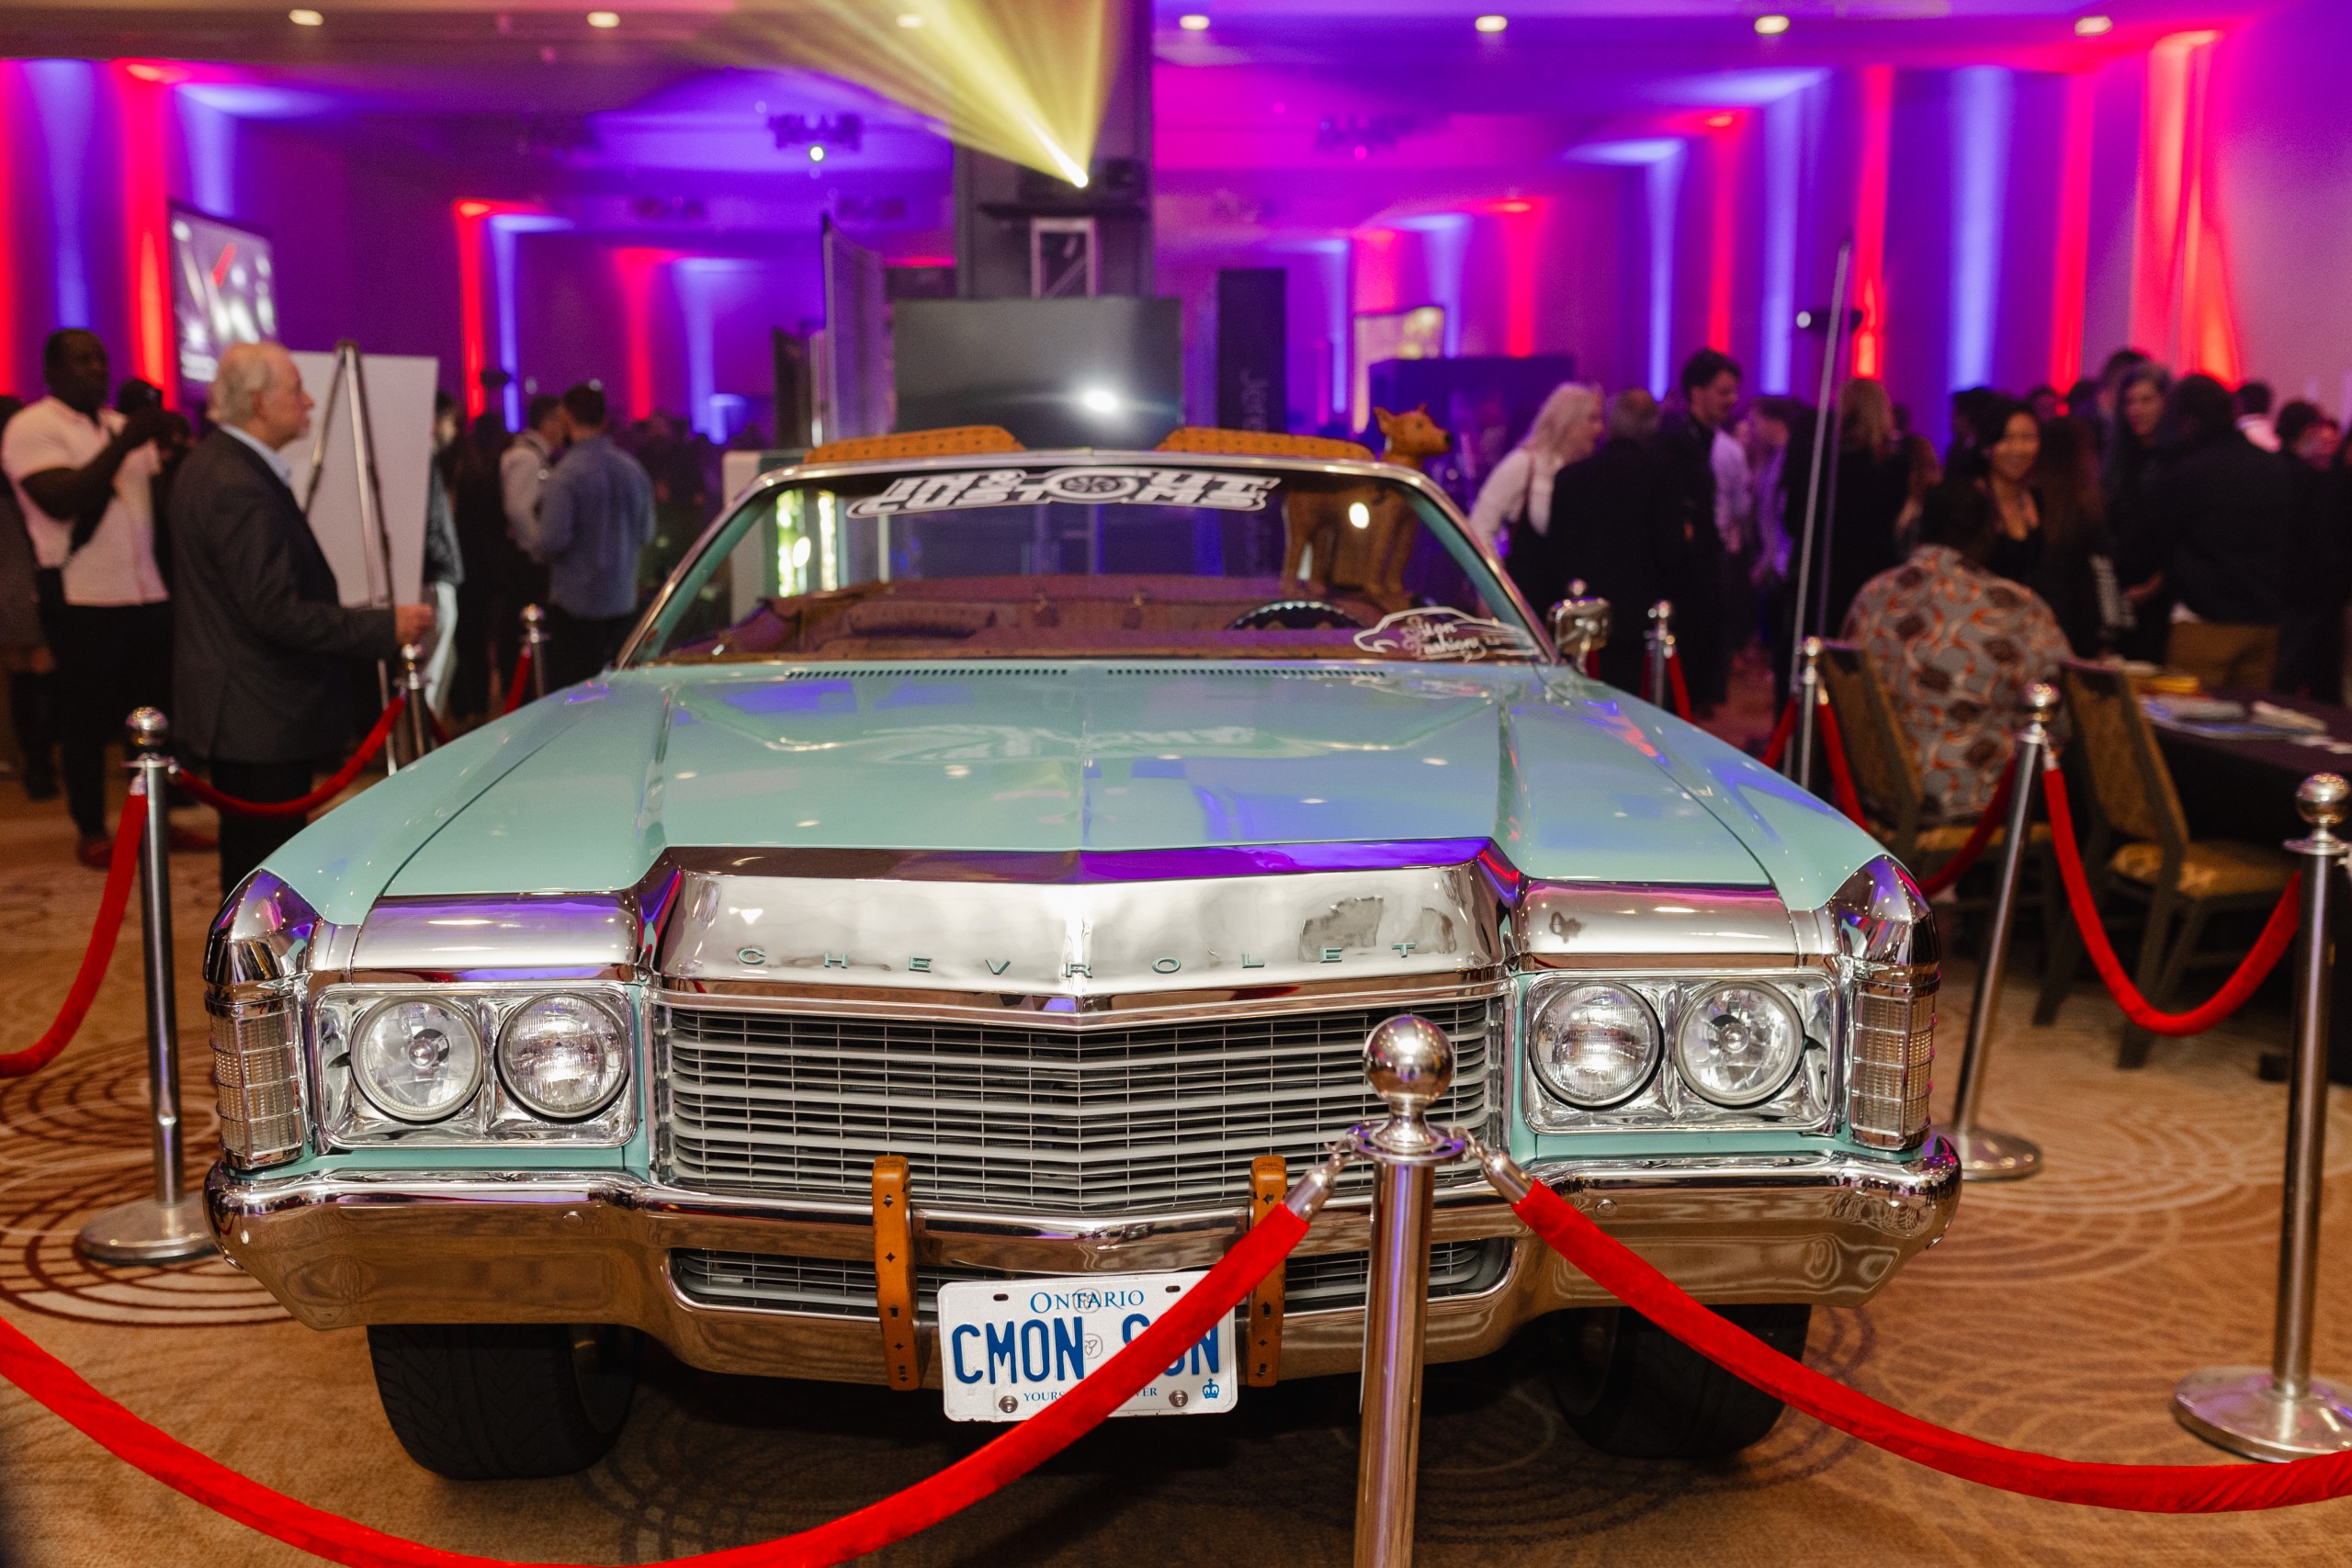 An event photography of a blue Cadillac parked in front of a crowd of people.